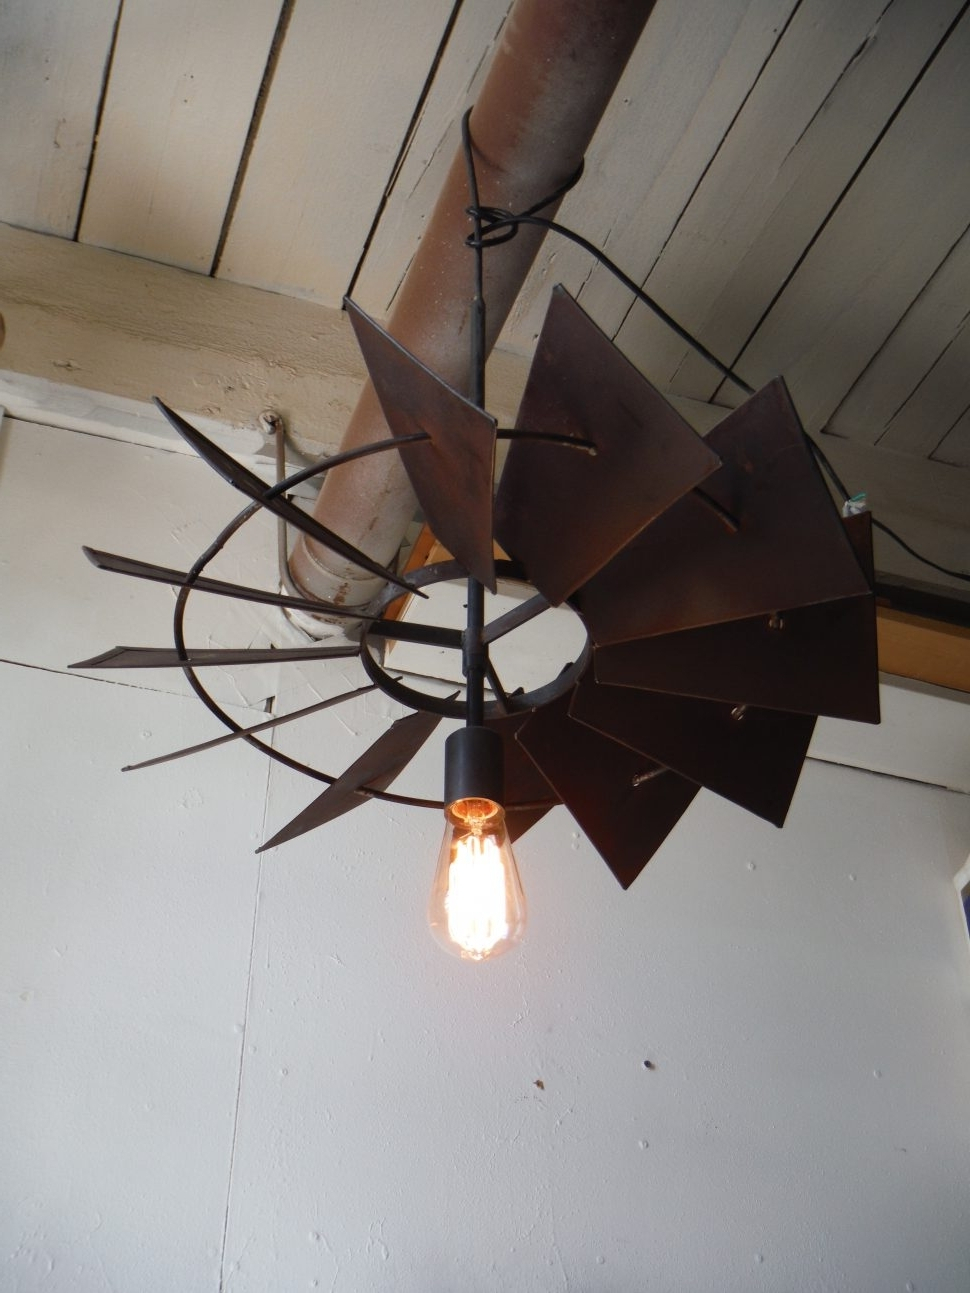 View Gallery Of Outdoor Windmill Ceiling Fans With Light Showing 2 with dimensions 970 X 1293